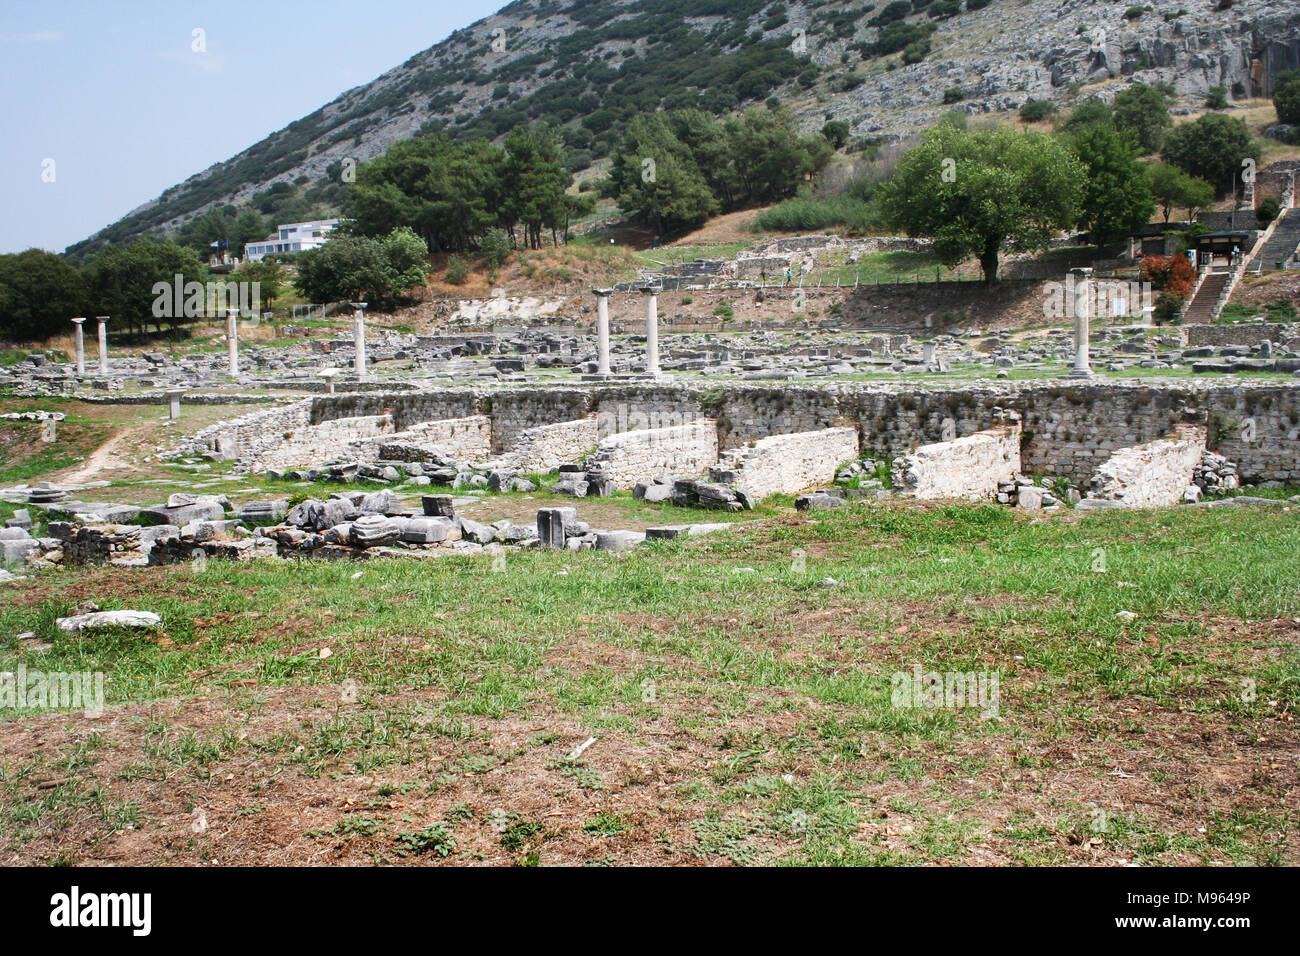 This historic theater in Philippi would have been visited Paul and other early Christians. It would have housed dramas and gladiator fights. Stock Photo